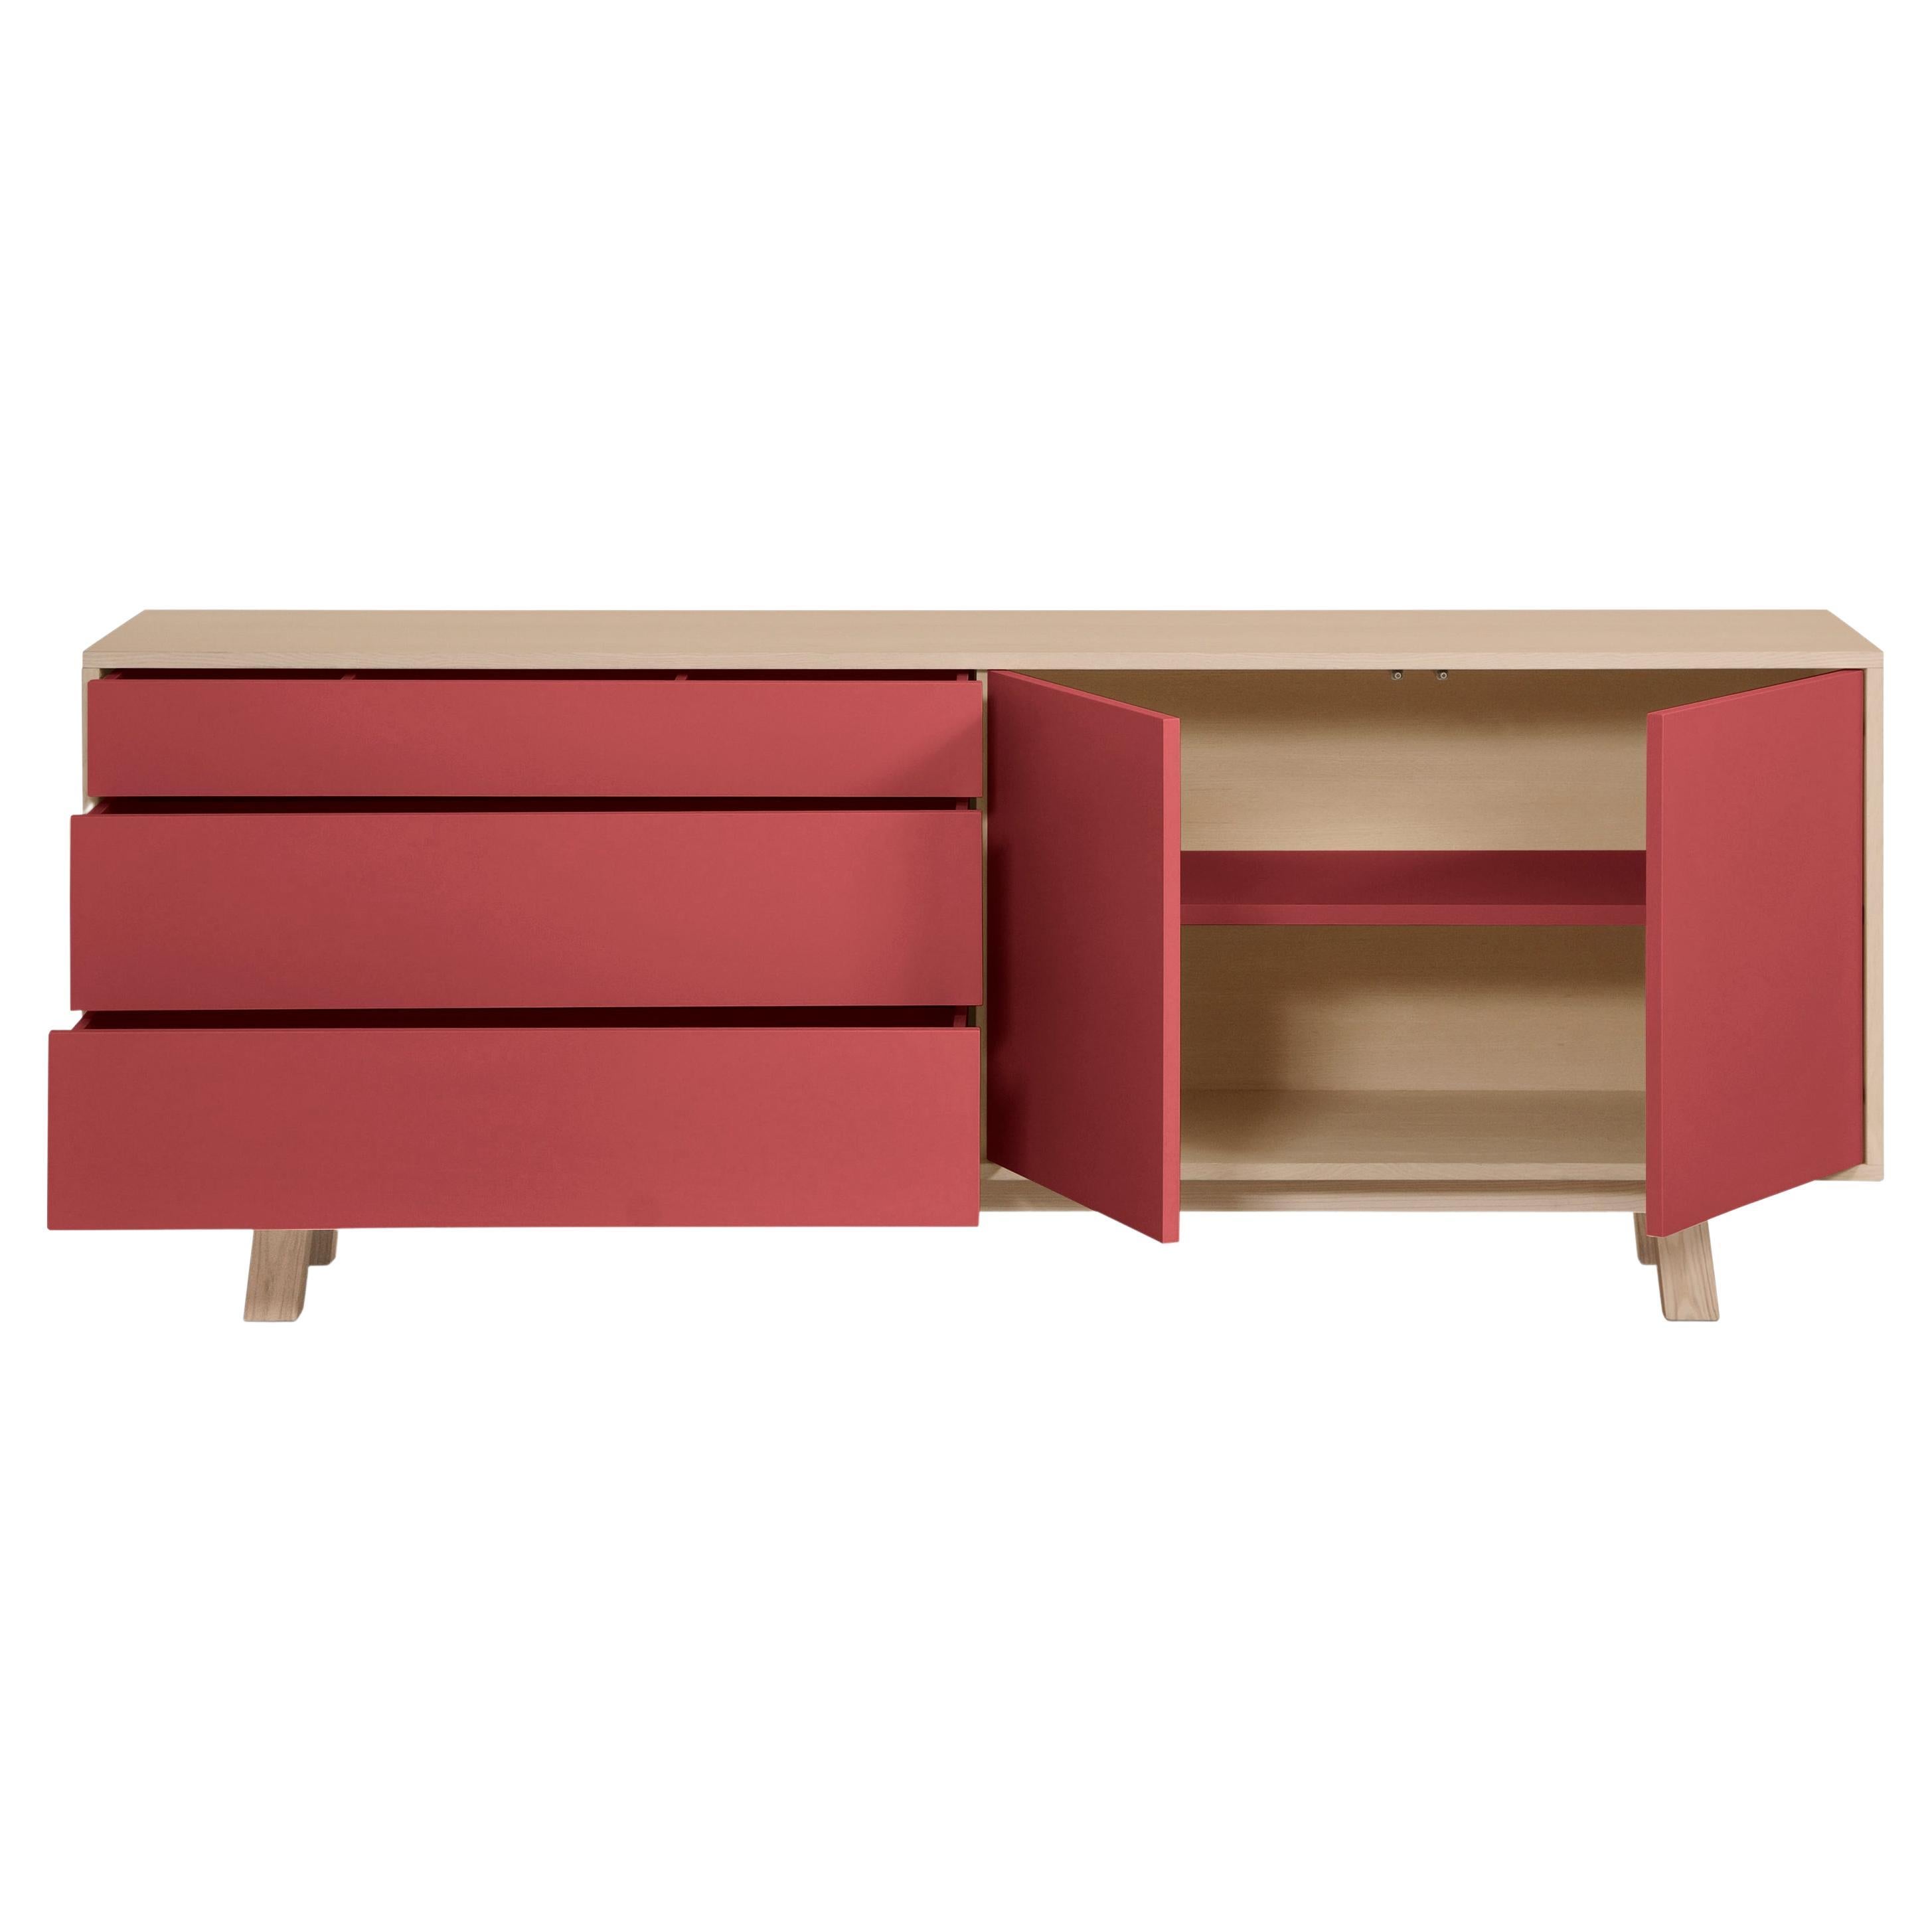 Low 2 Door & 3 Drawer Sideboard in Ash Wood, Red and 10 Other Colors